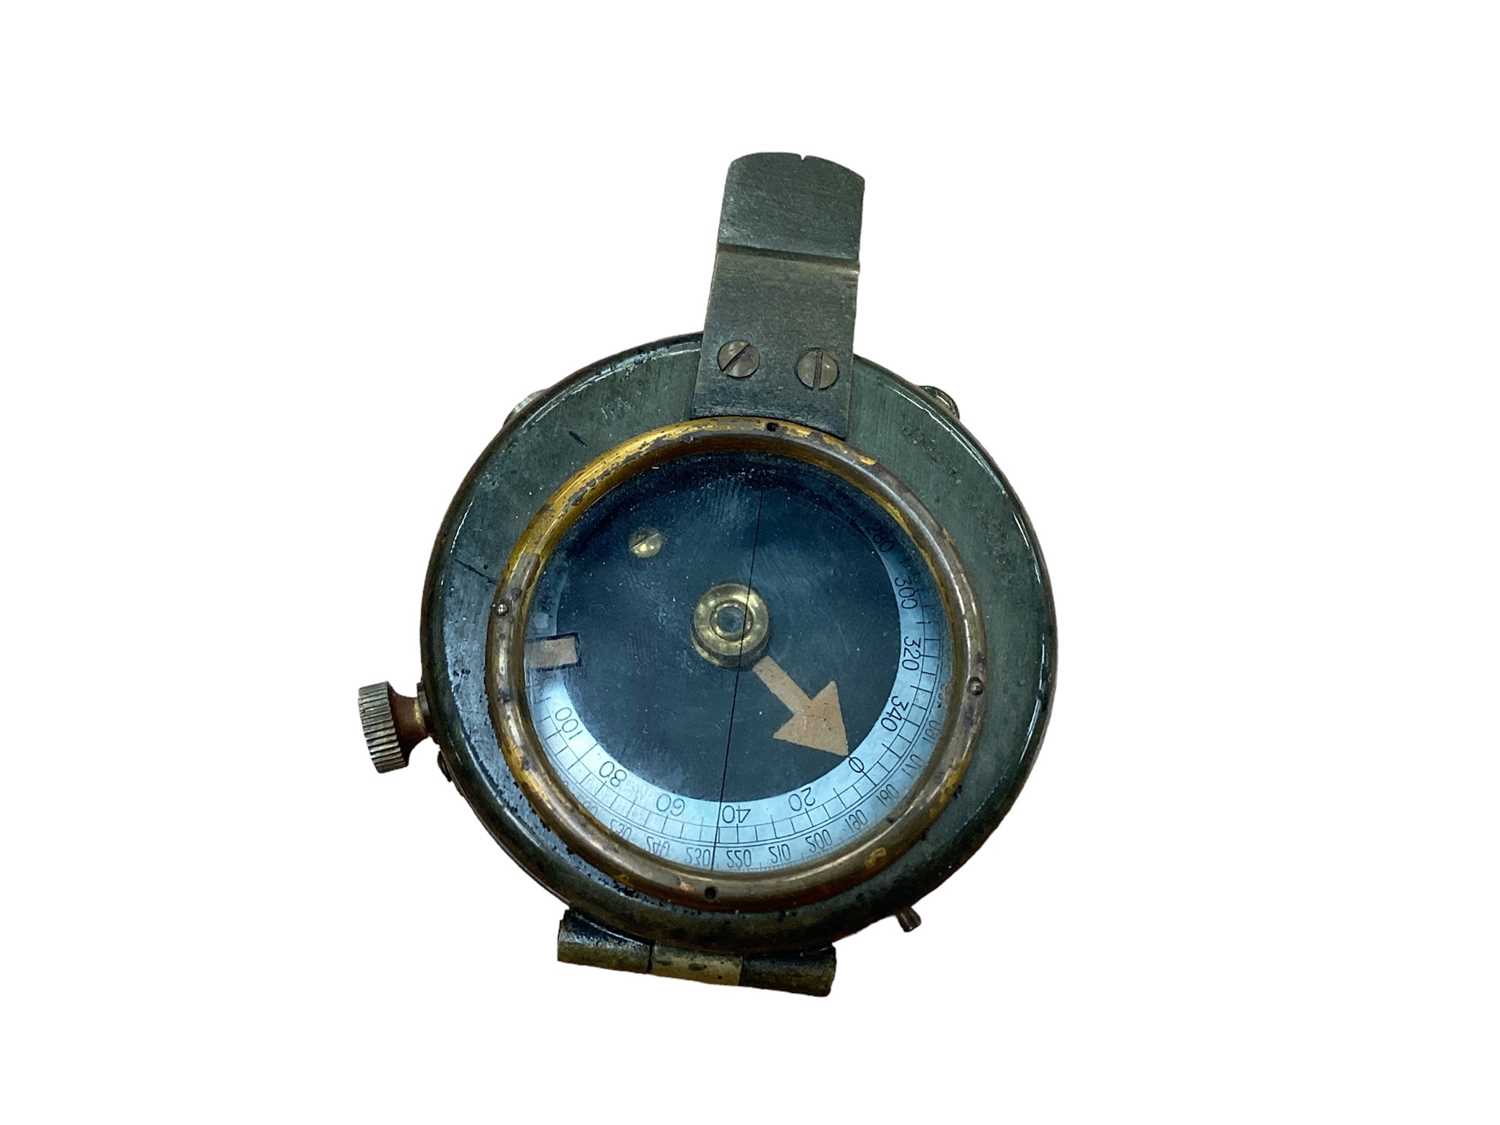 First World War 1915 Officers compass in case cannon shell - Image 2 of 4